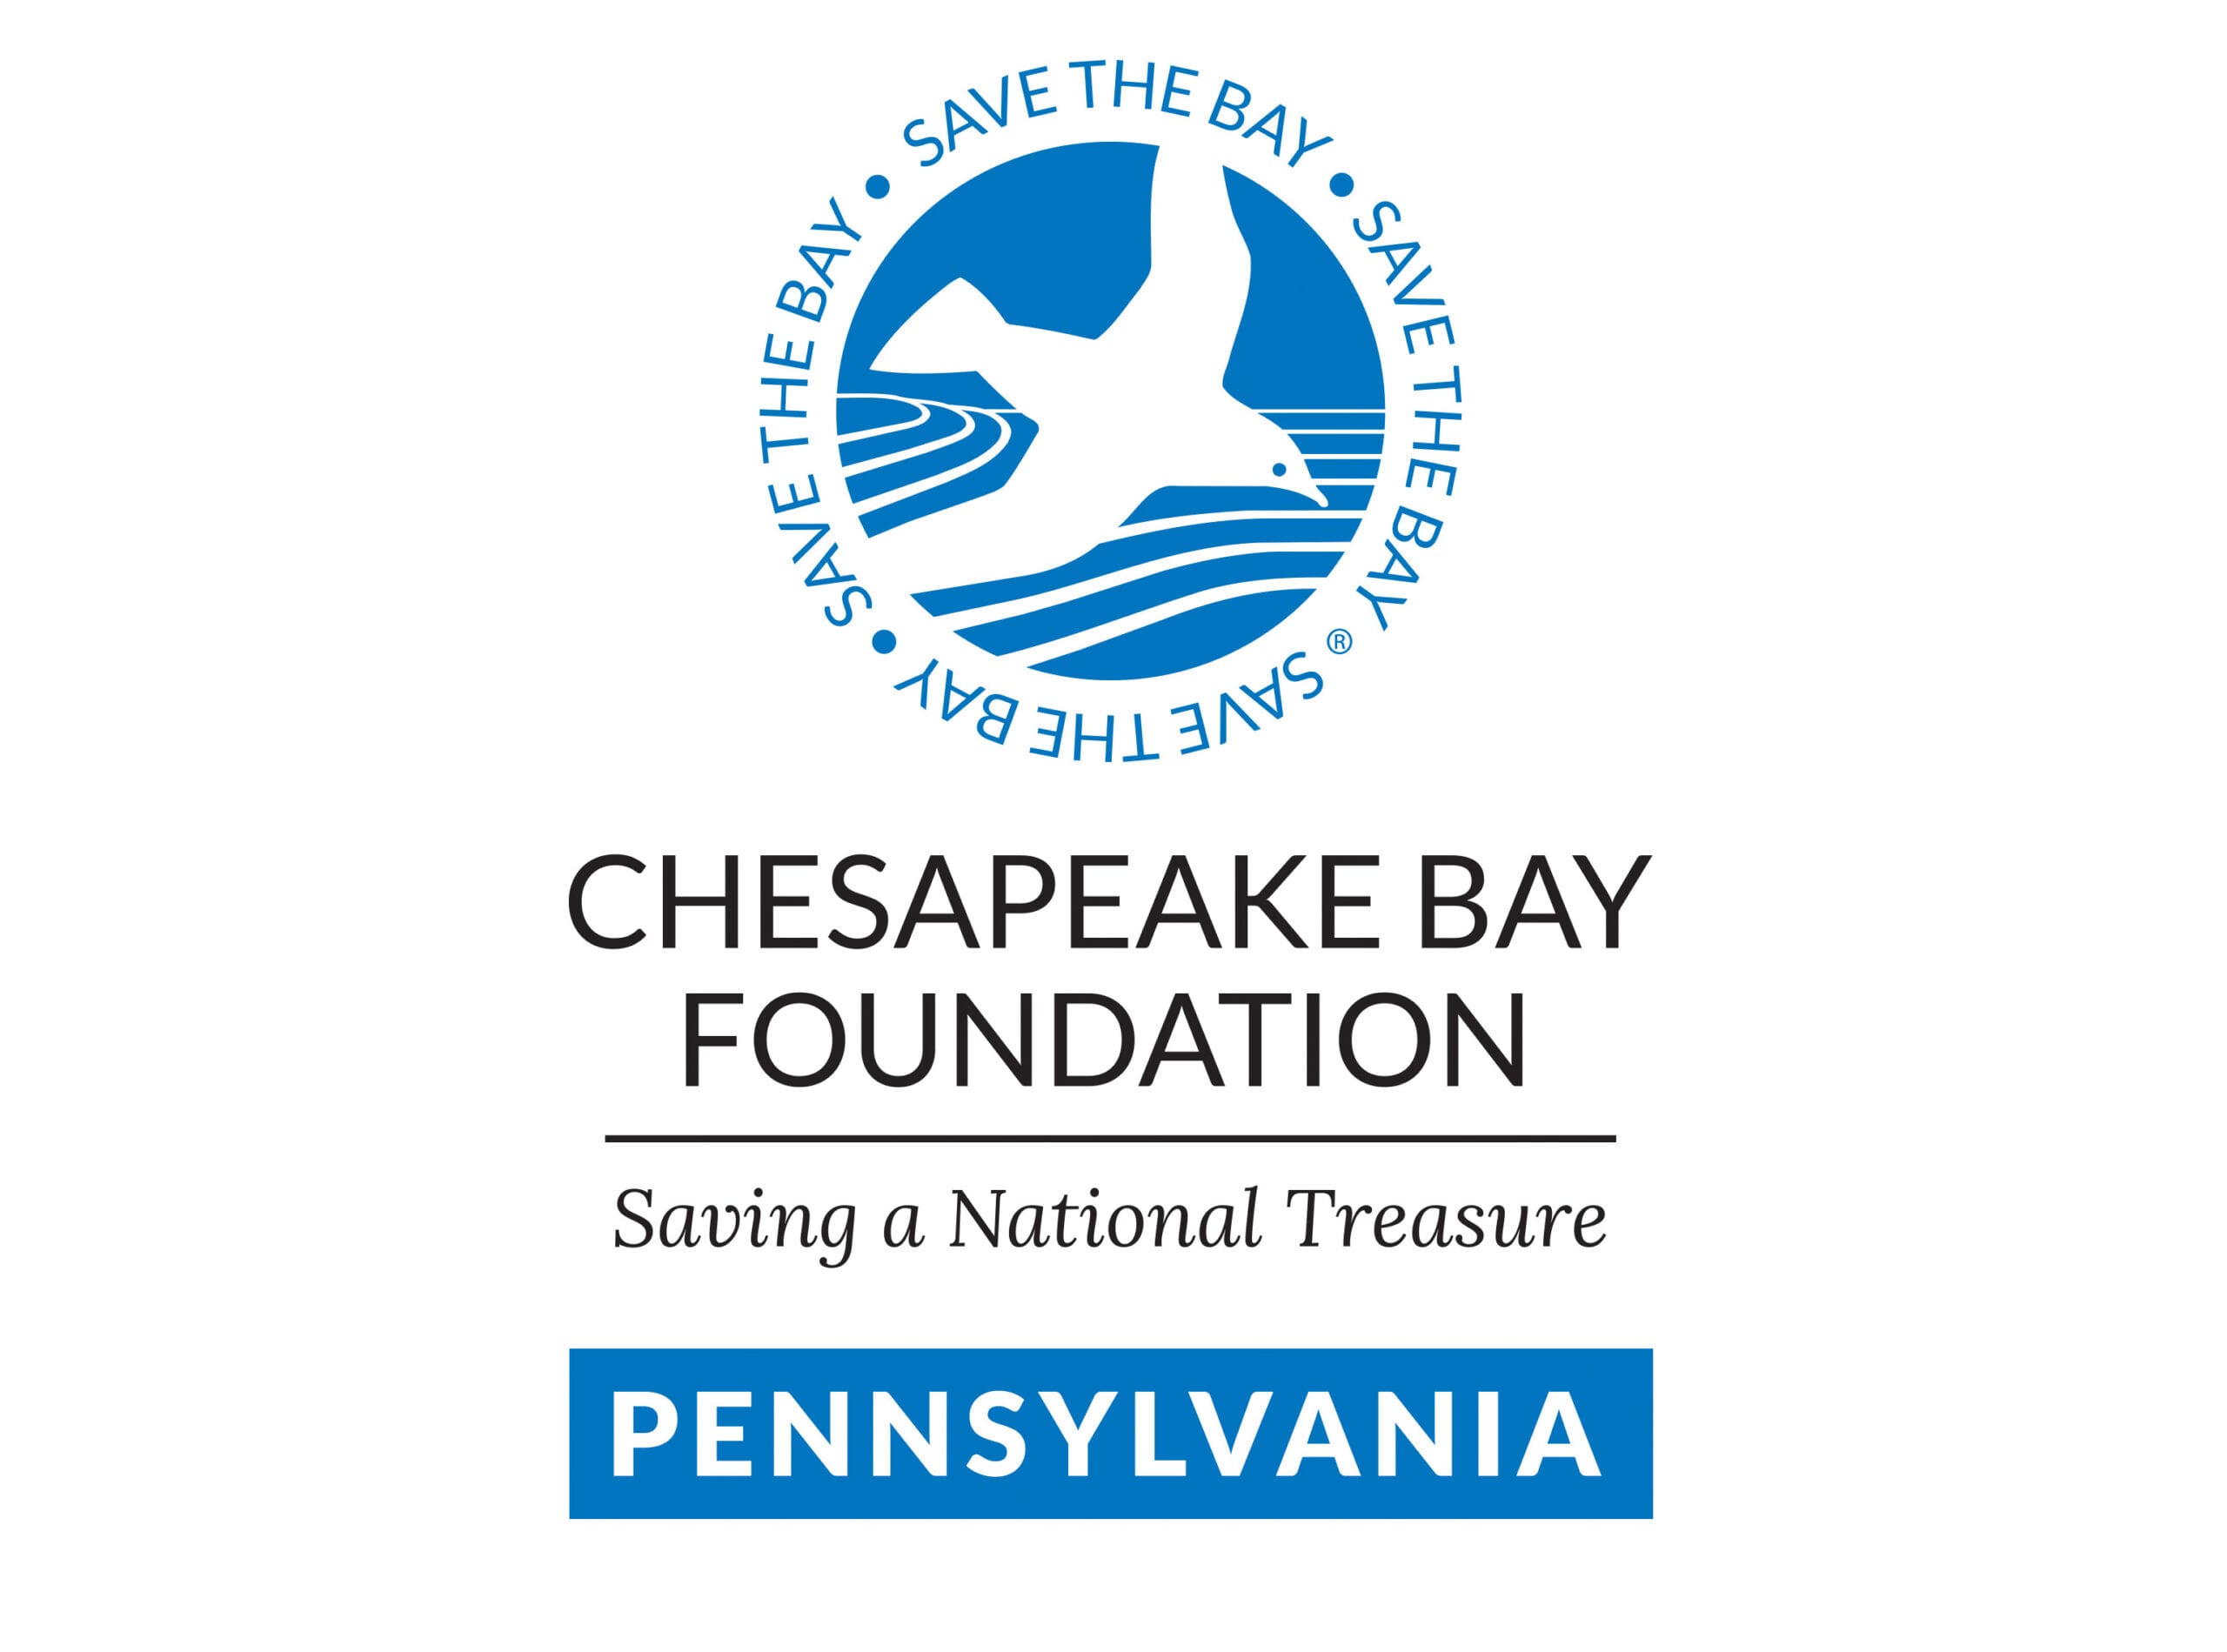 PASA Event Sponsorship from https://www.cbf.org/about-the-bay/maps/geography/chesapeake-bay-watershed.html